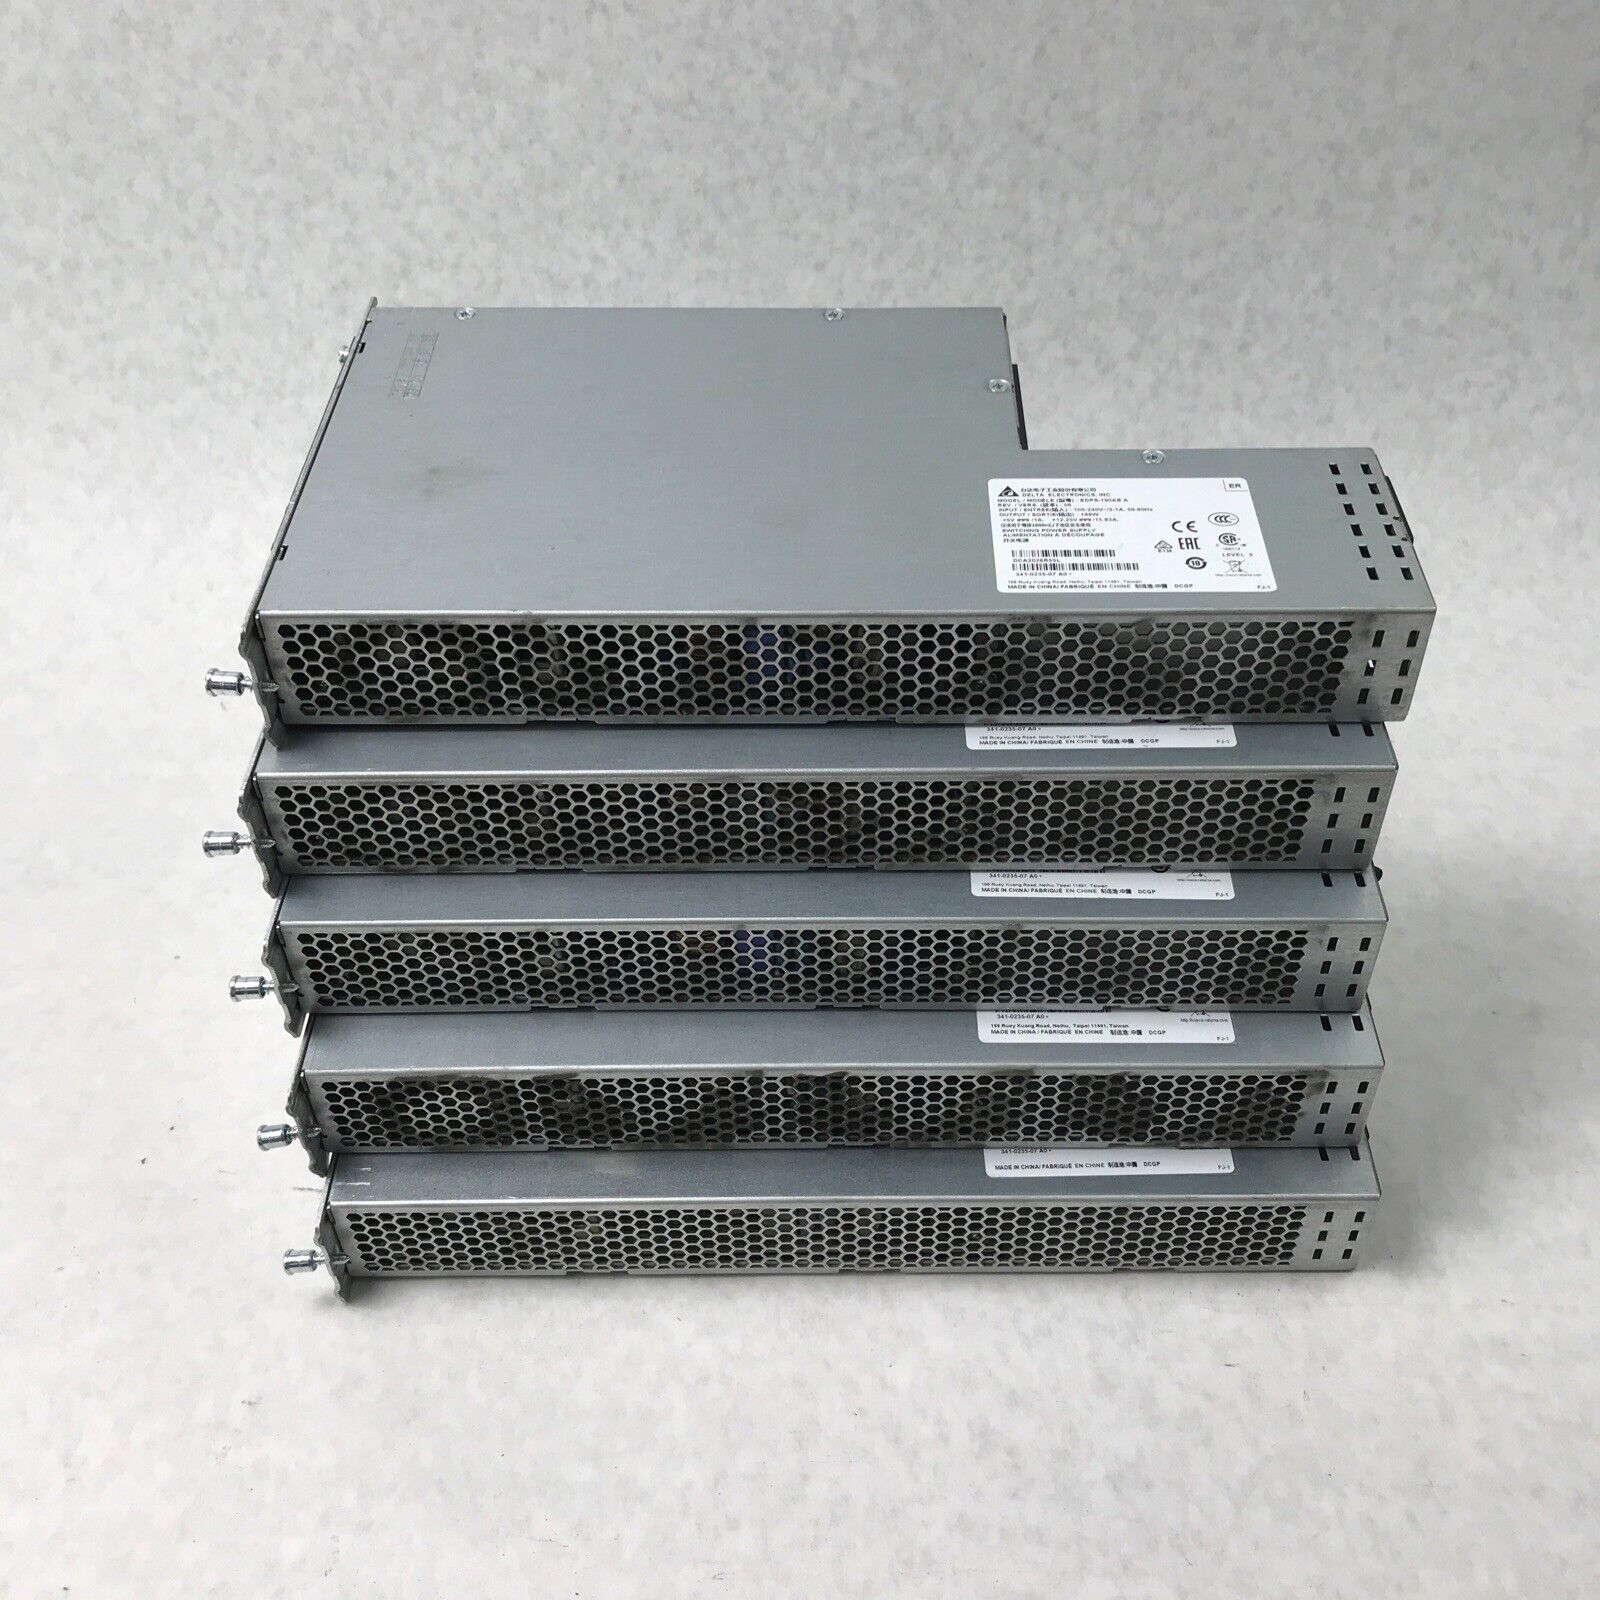 Delta Electronics EDPS-190 240V 60Hz 199W Power Supply (Tested) (Lot of 5)